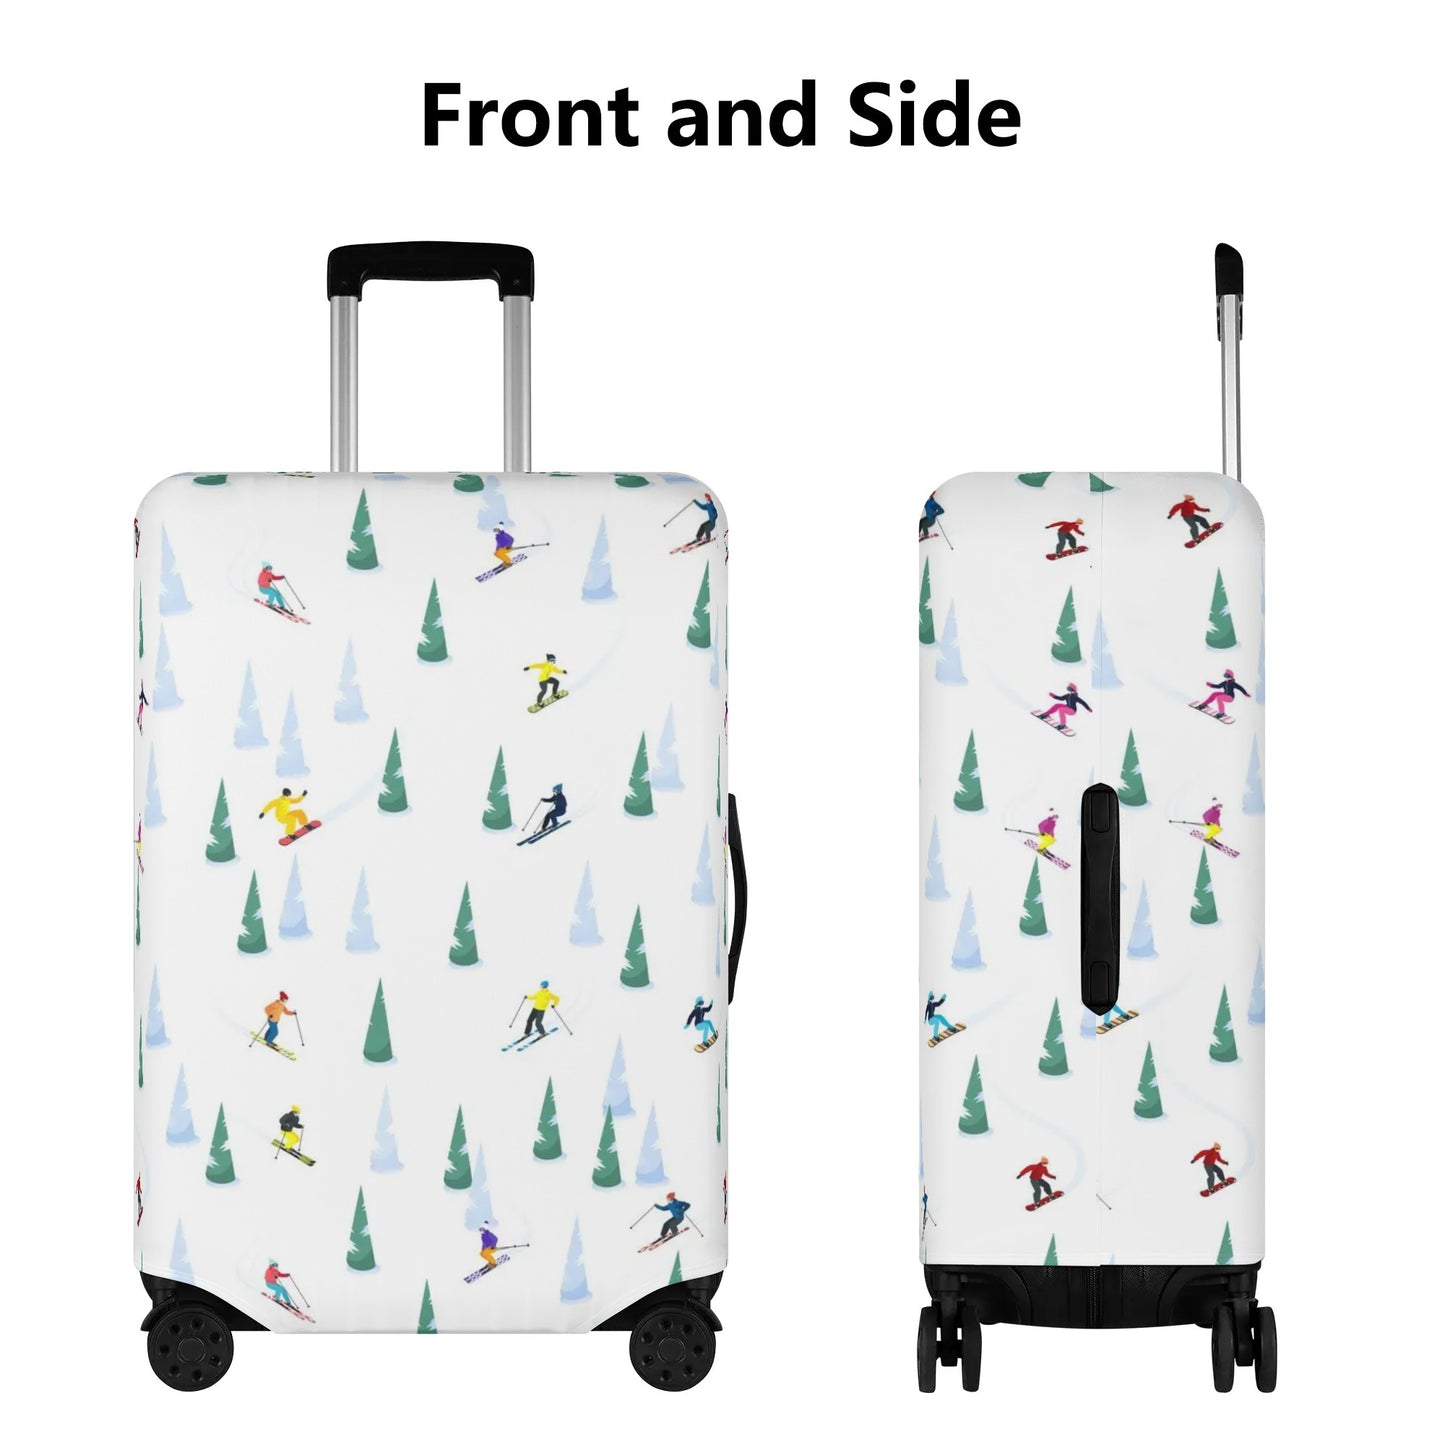 Ski Luggage Cover, Snowboard Skiing Mountain Suitcase Protector Hard Carry On Bag Washable Wrap Large Small Travel Aesthetic Sleeve